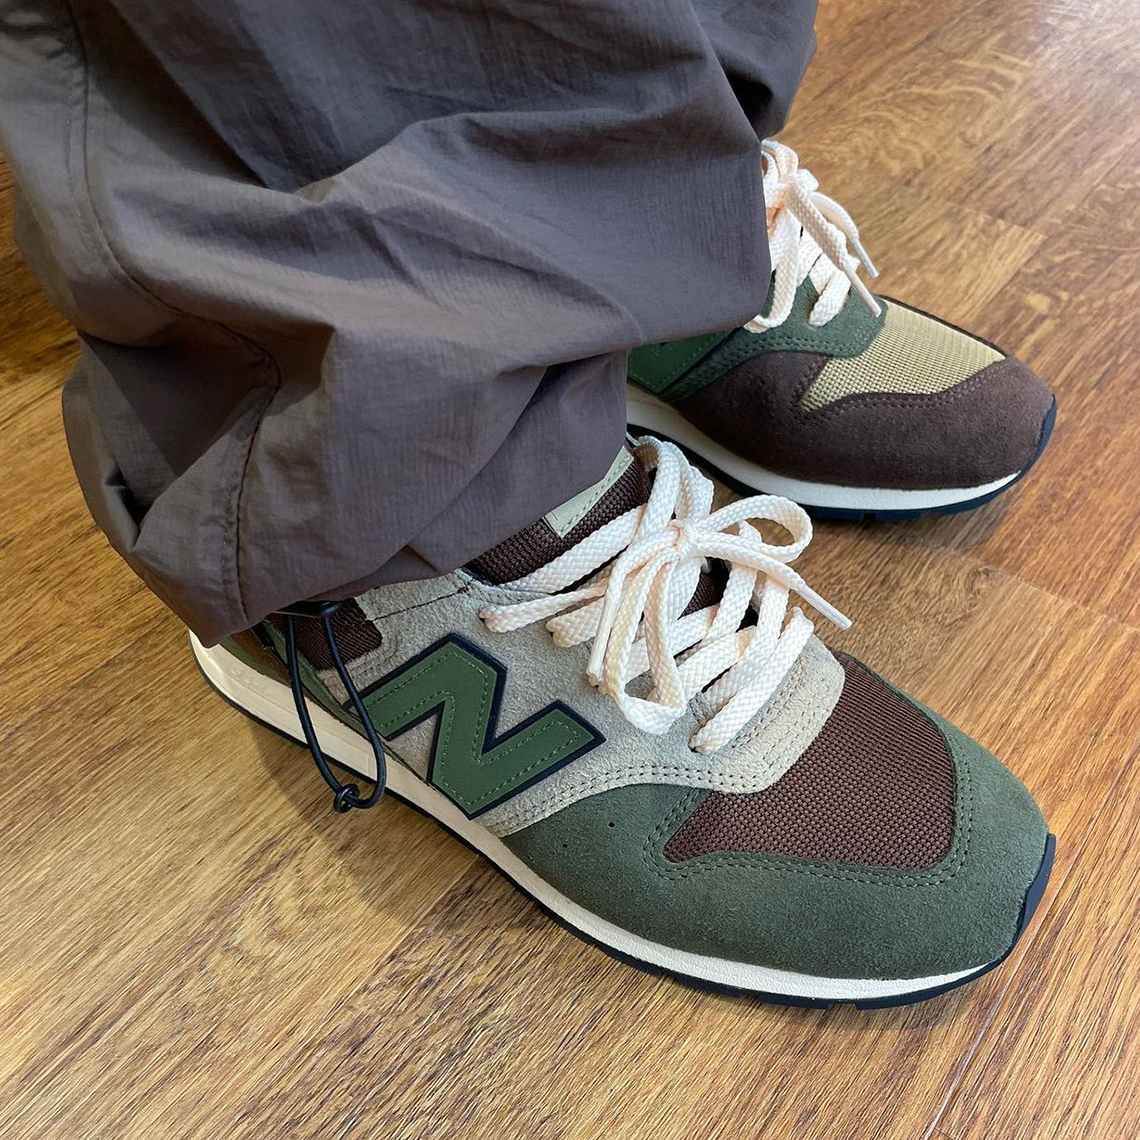 Beams New Balance cuir 576 Release Date 1